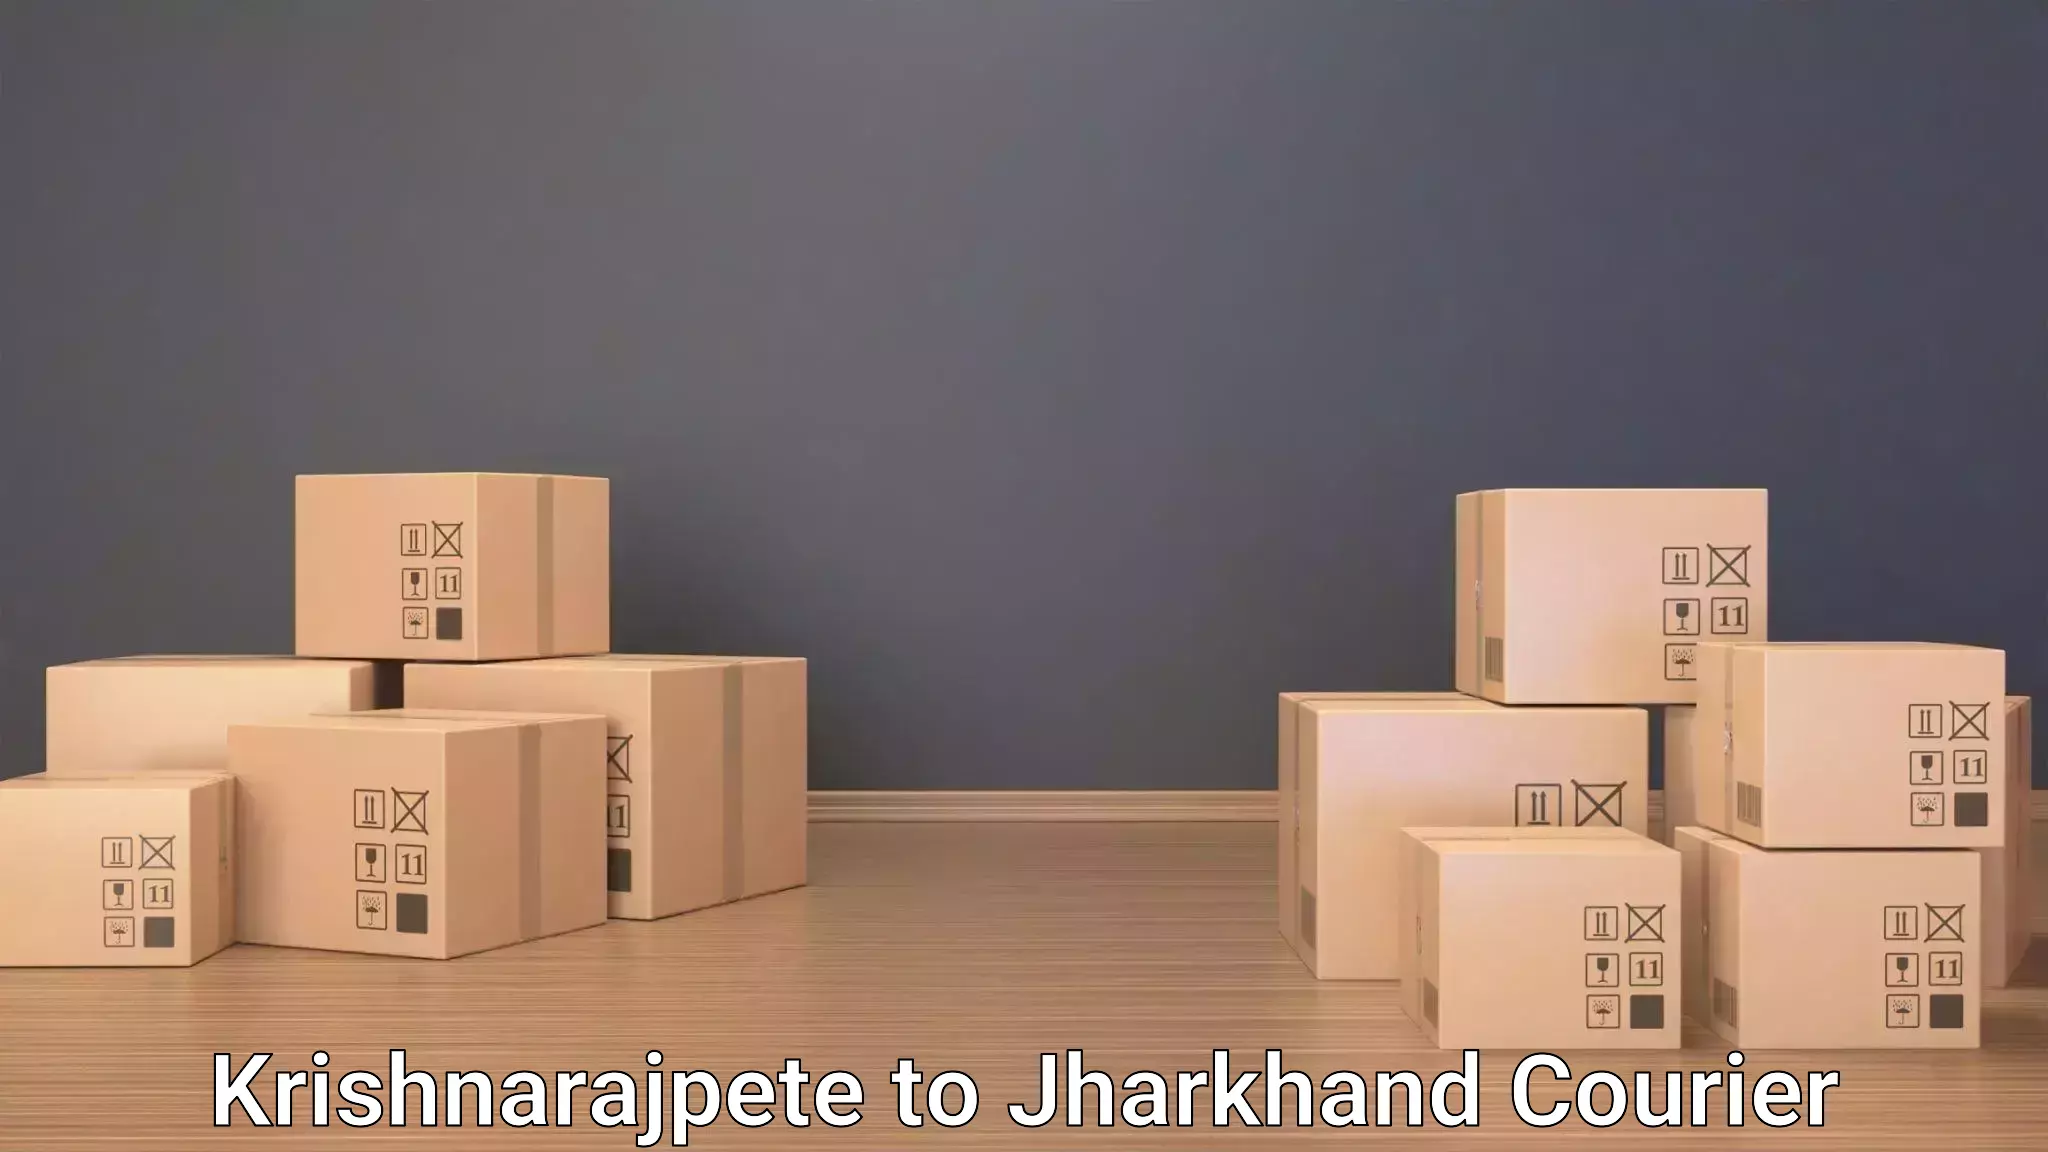 Same day luggage service in Krishnarajpete to Jharkhand